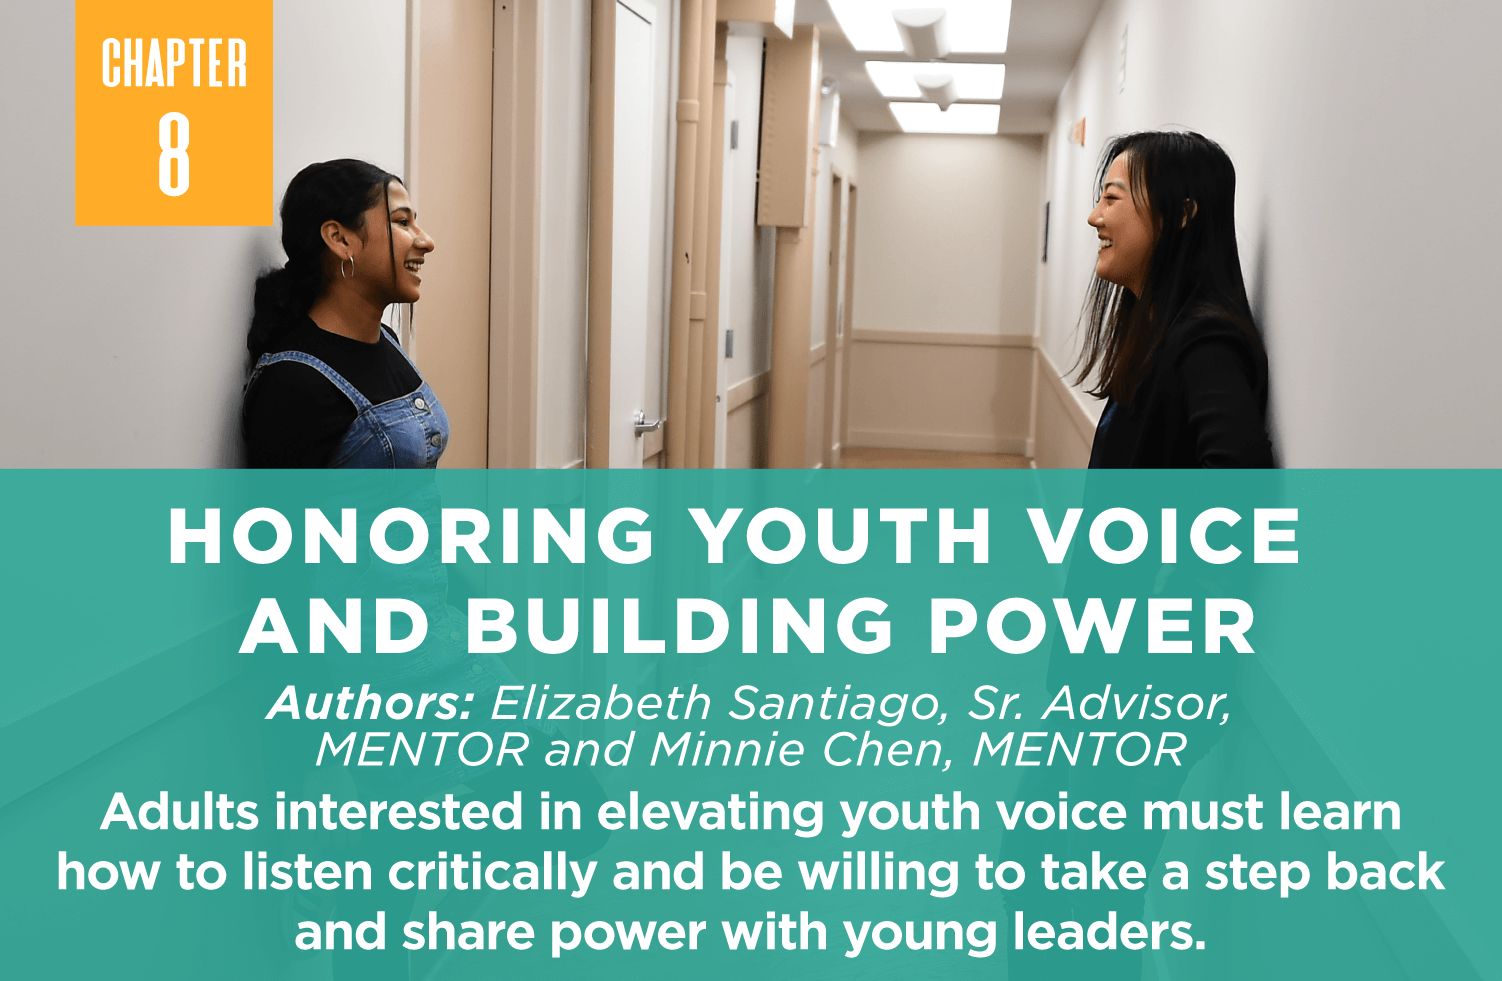 Honoring Youth Voice 
and Building Power
Authors: Elizabeth Santiago, Sr. Advisor, 
MENTOR and Minnie Chen, MENTOR
Adults interested in elevating youth voice must learn how to listen critically and be willing to take a step back and share power with young leaders.